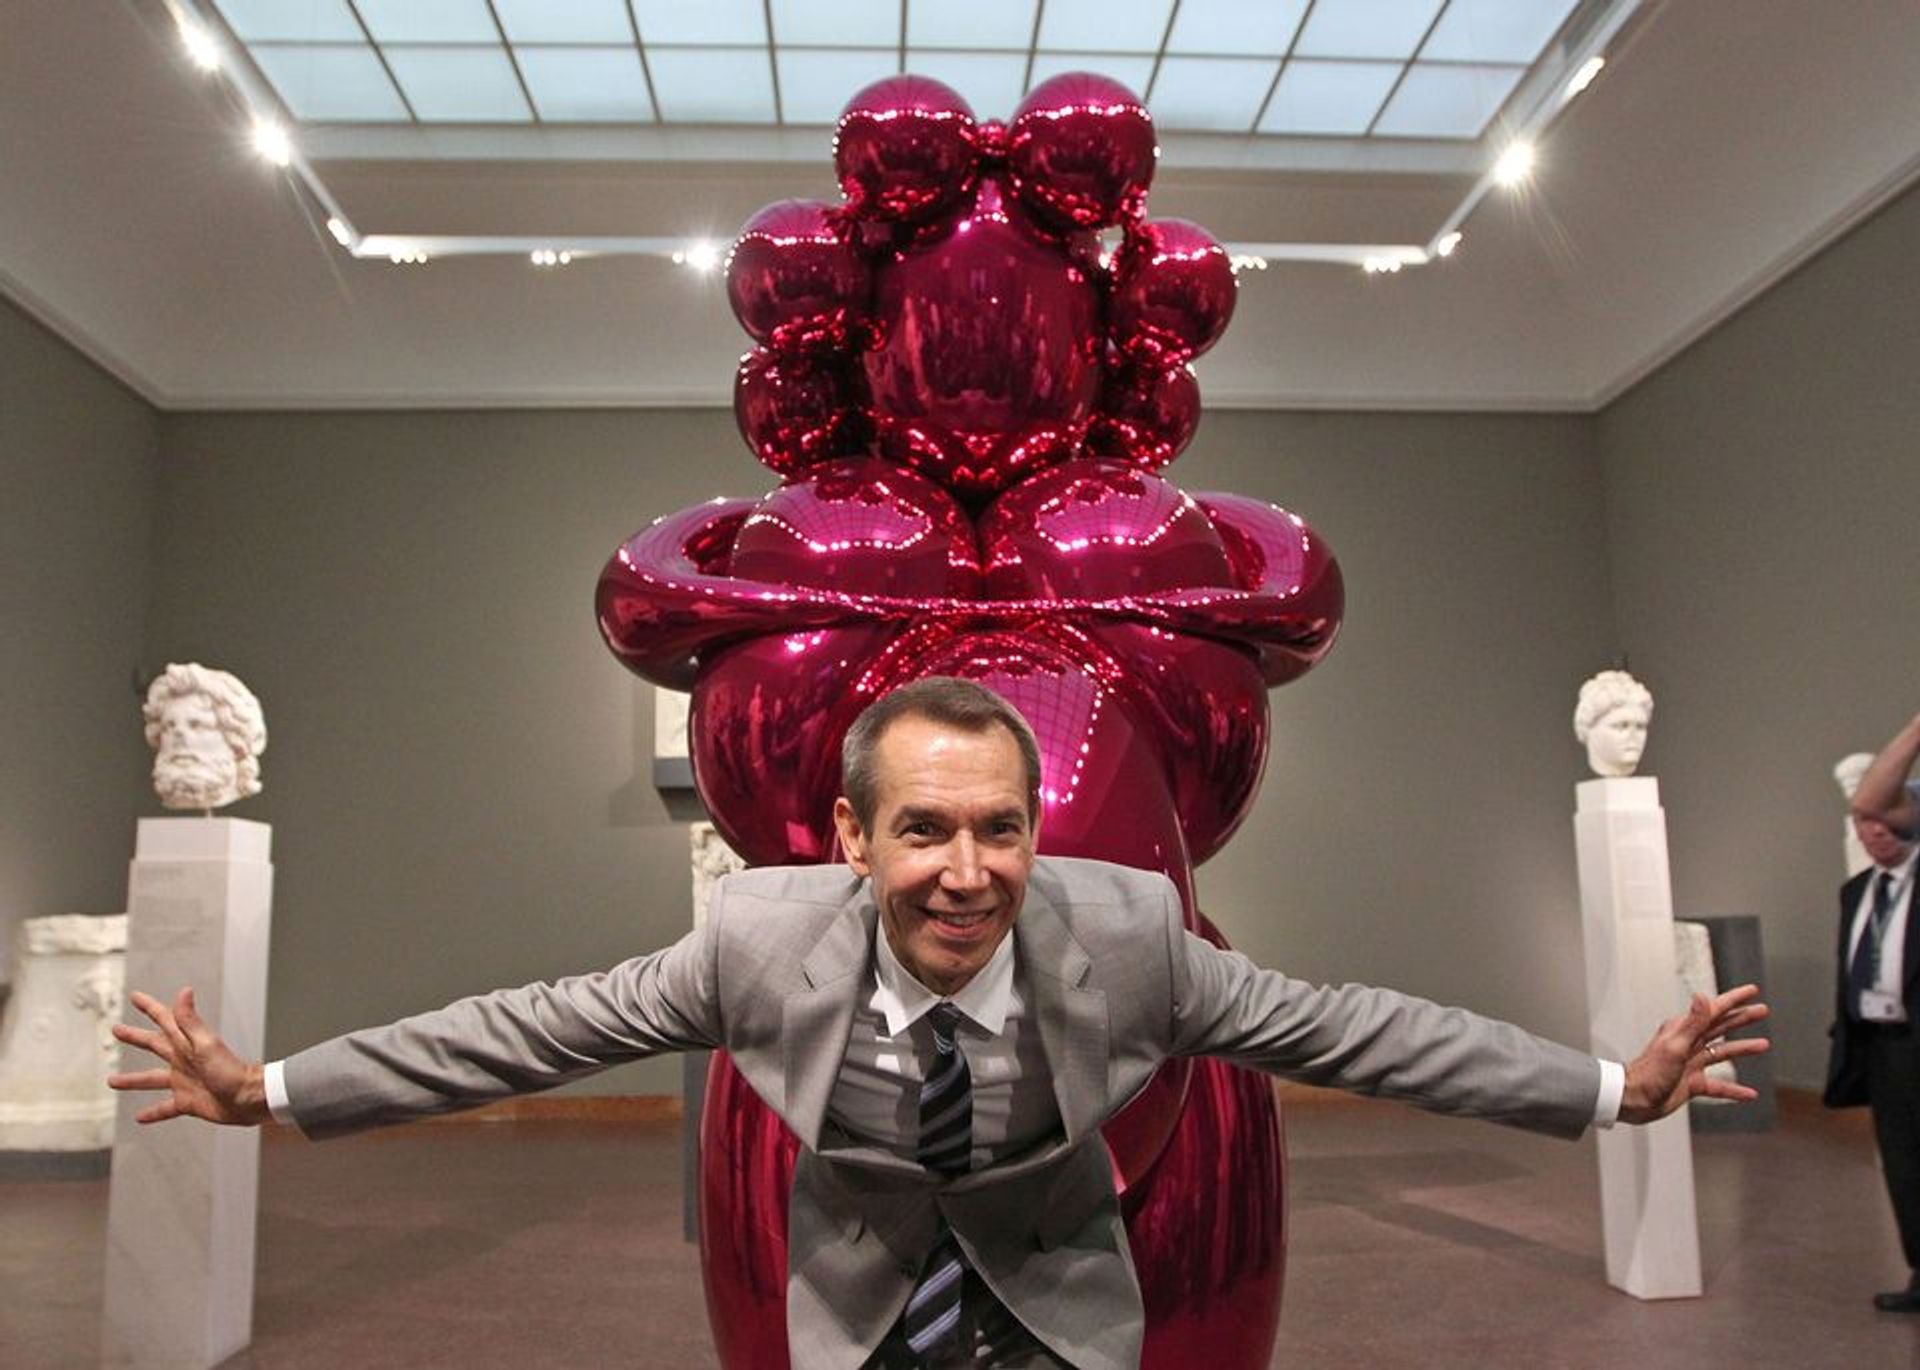 The millionaire artist Jeff Koons received $1m-$2m in taxpayer-funded forgivable loans. © DANIEL ROLAND/AFP/Getty Images